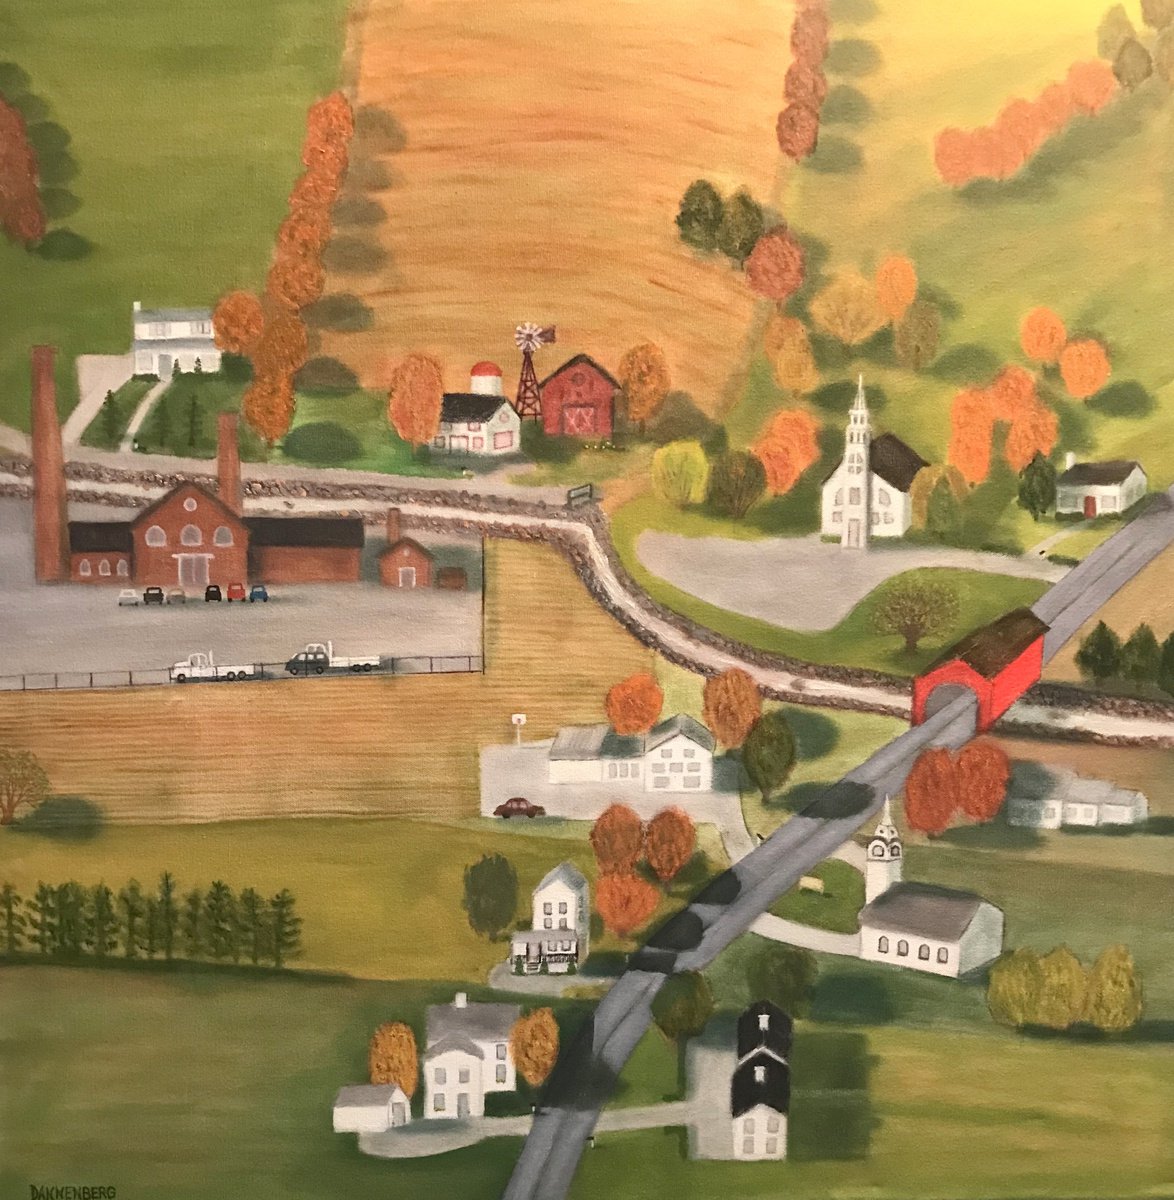 AUTUMN IN A SMALL TOWN by Leslie Dannenberg